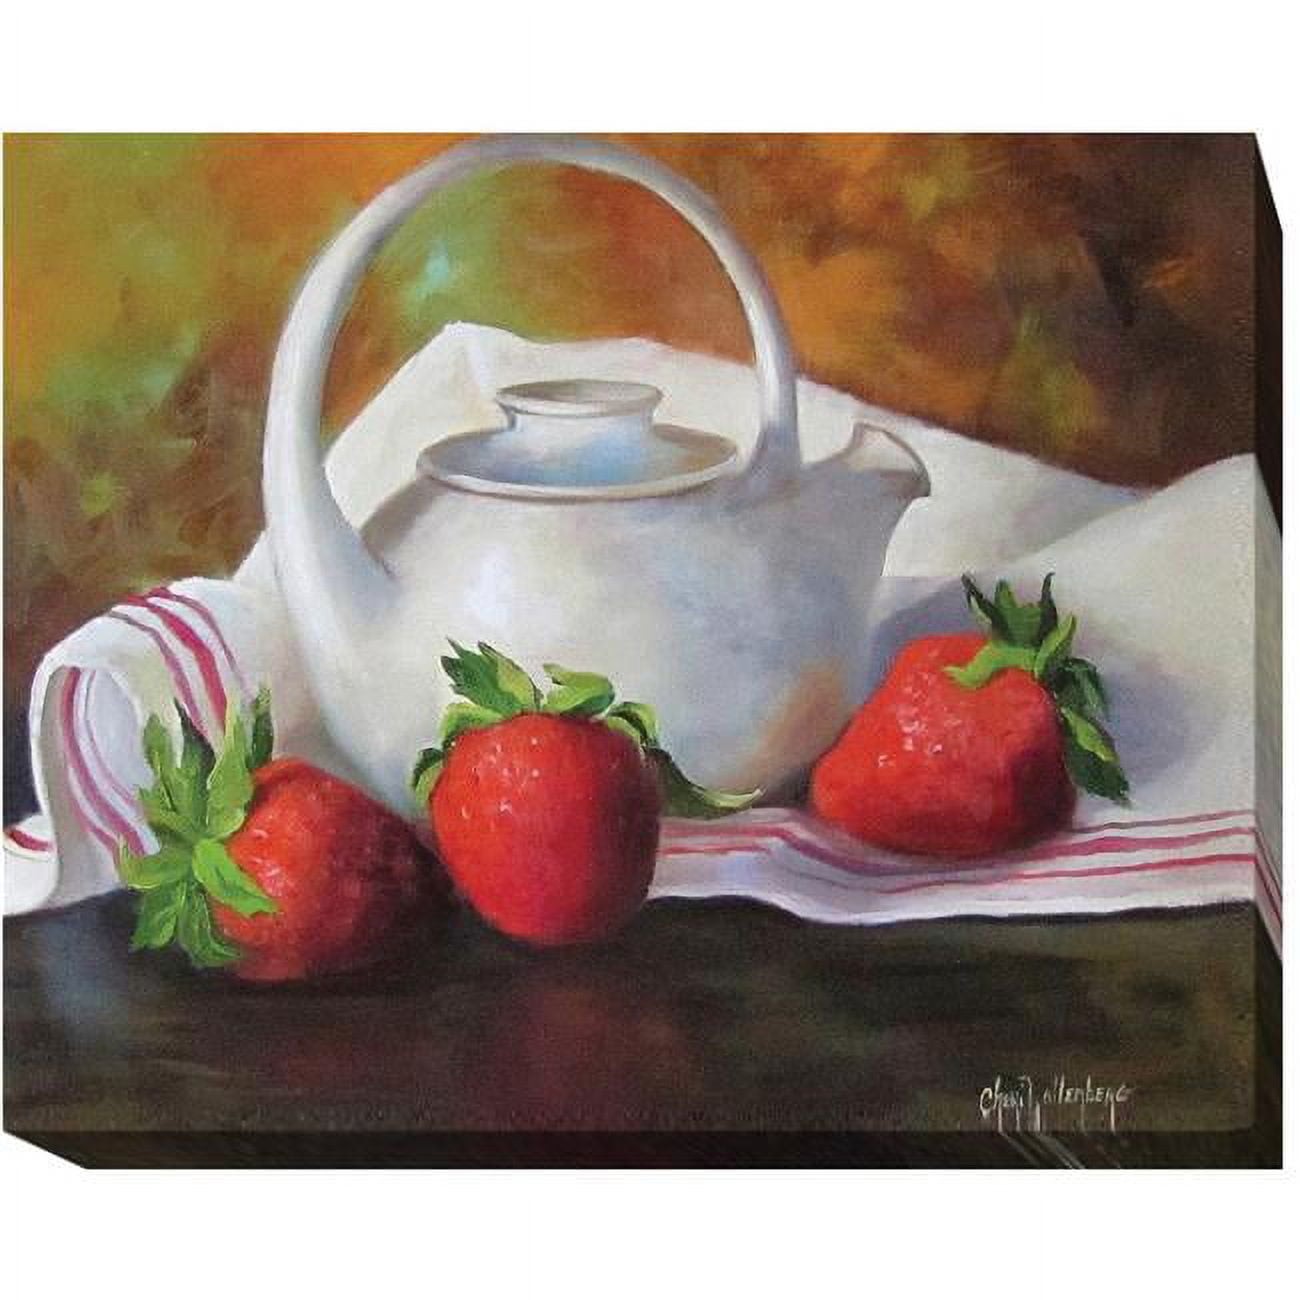 1215j834ig Strawberries & White Teapot By Cheri Wollenberg Premium Gallery-wrapped Canvas Giclee Art - 12 X 15 X 1.5 In.